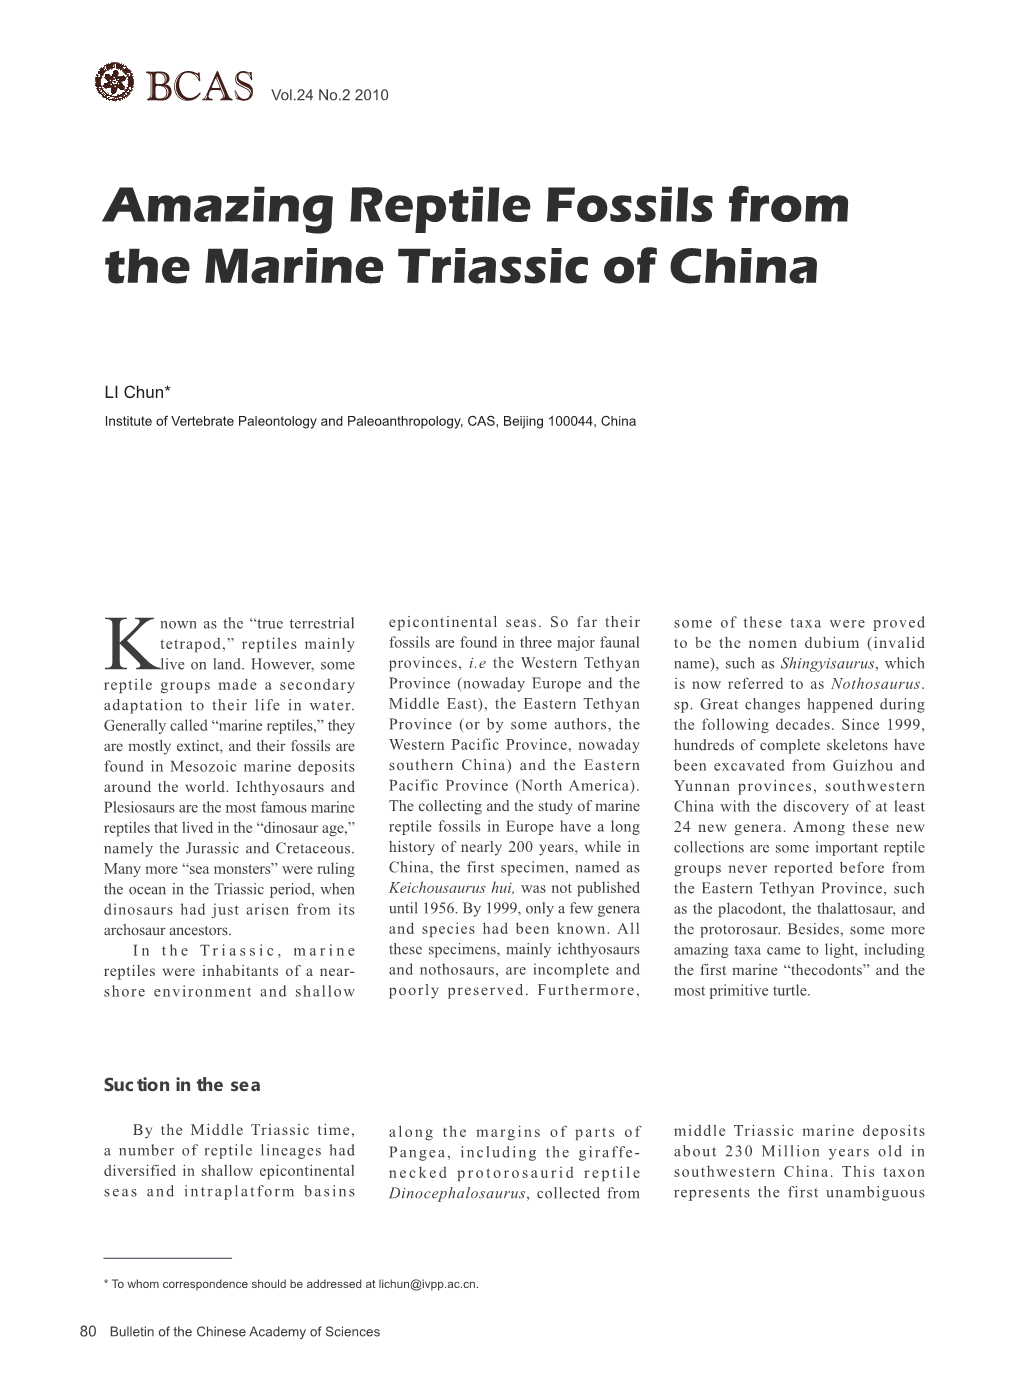 Amazing Reptile Fossils from the Marine Triassic of China